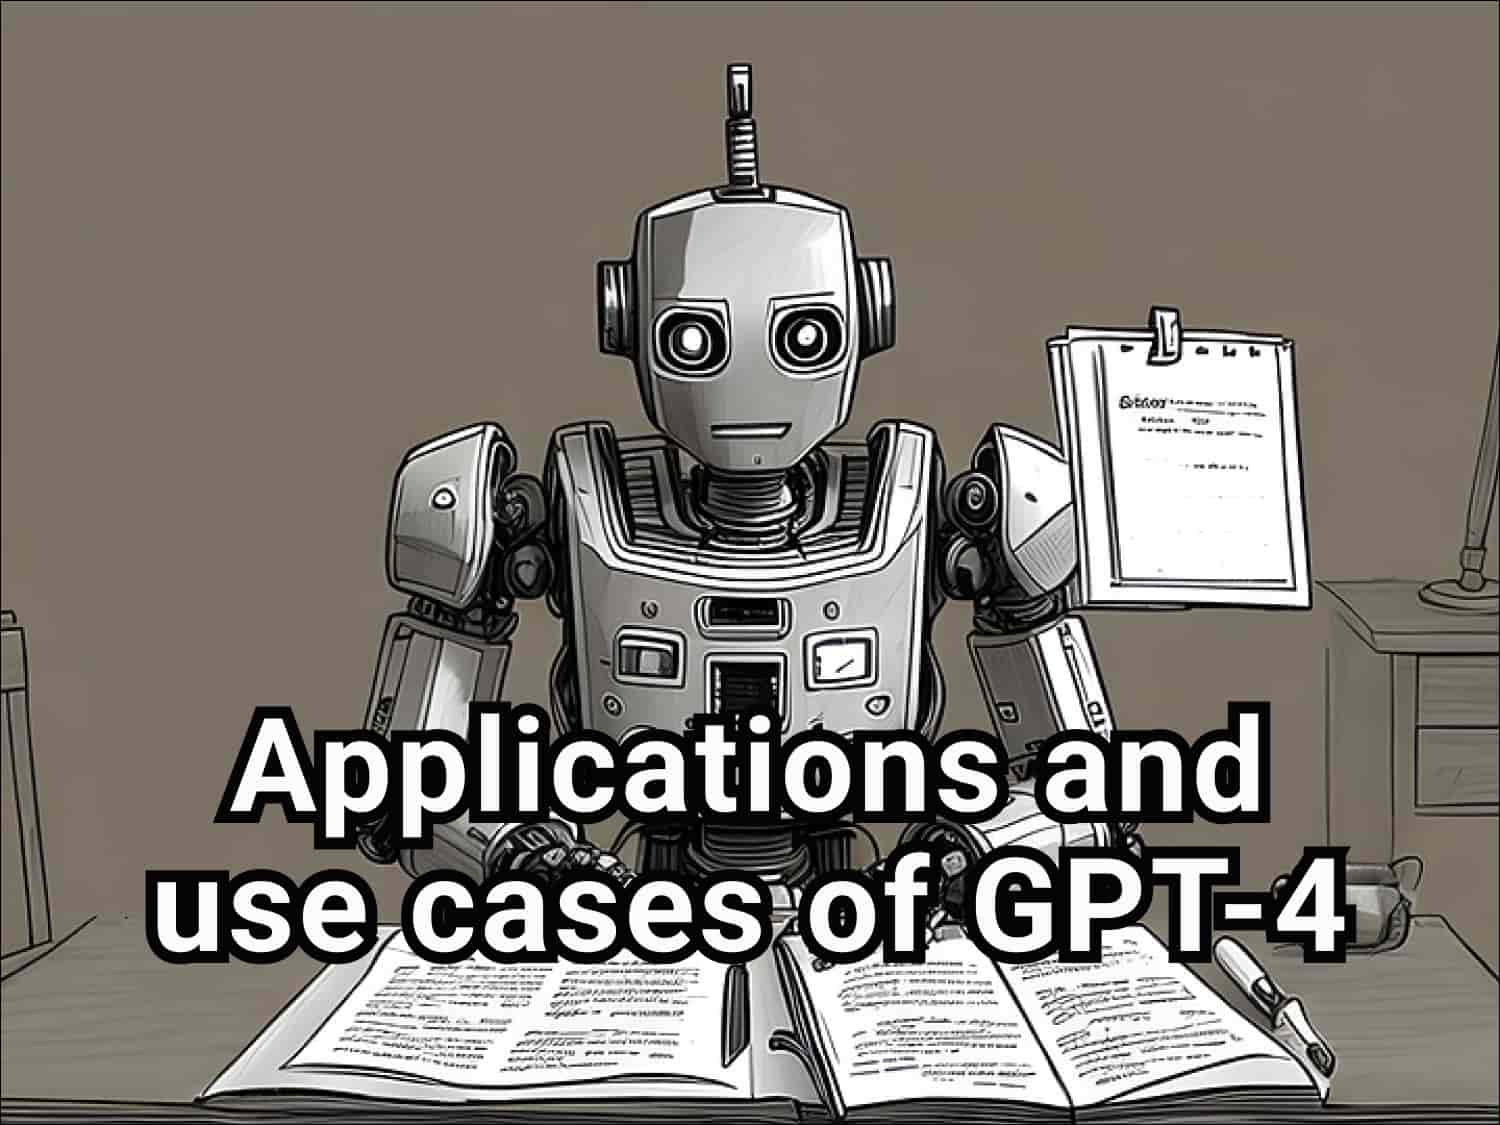 What Can GPT-4 Do? Applications and Use Cases of GPT-4